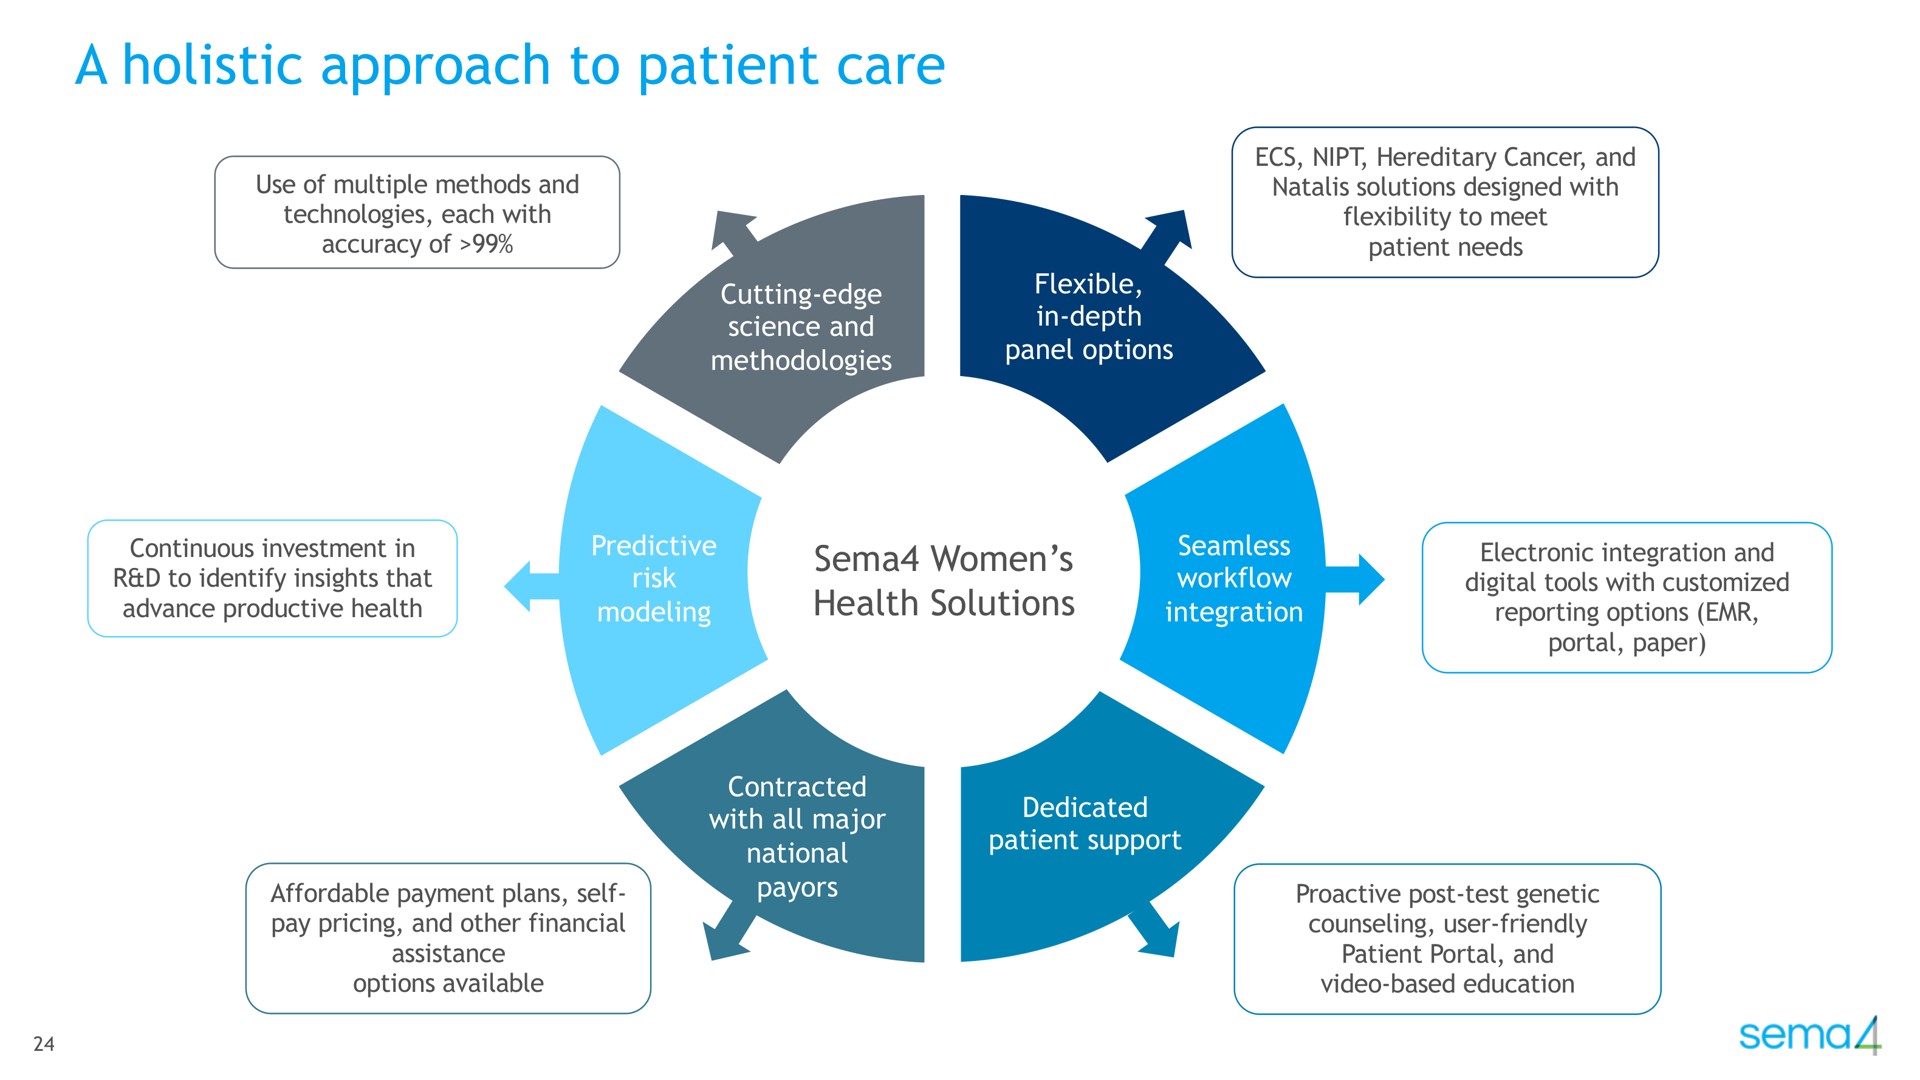 a holistic approach to patient care | Sema4